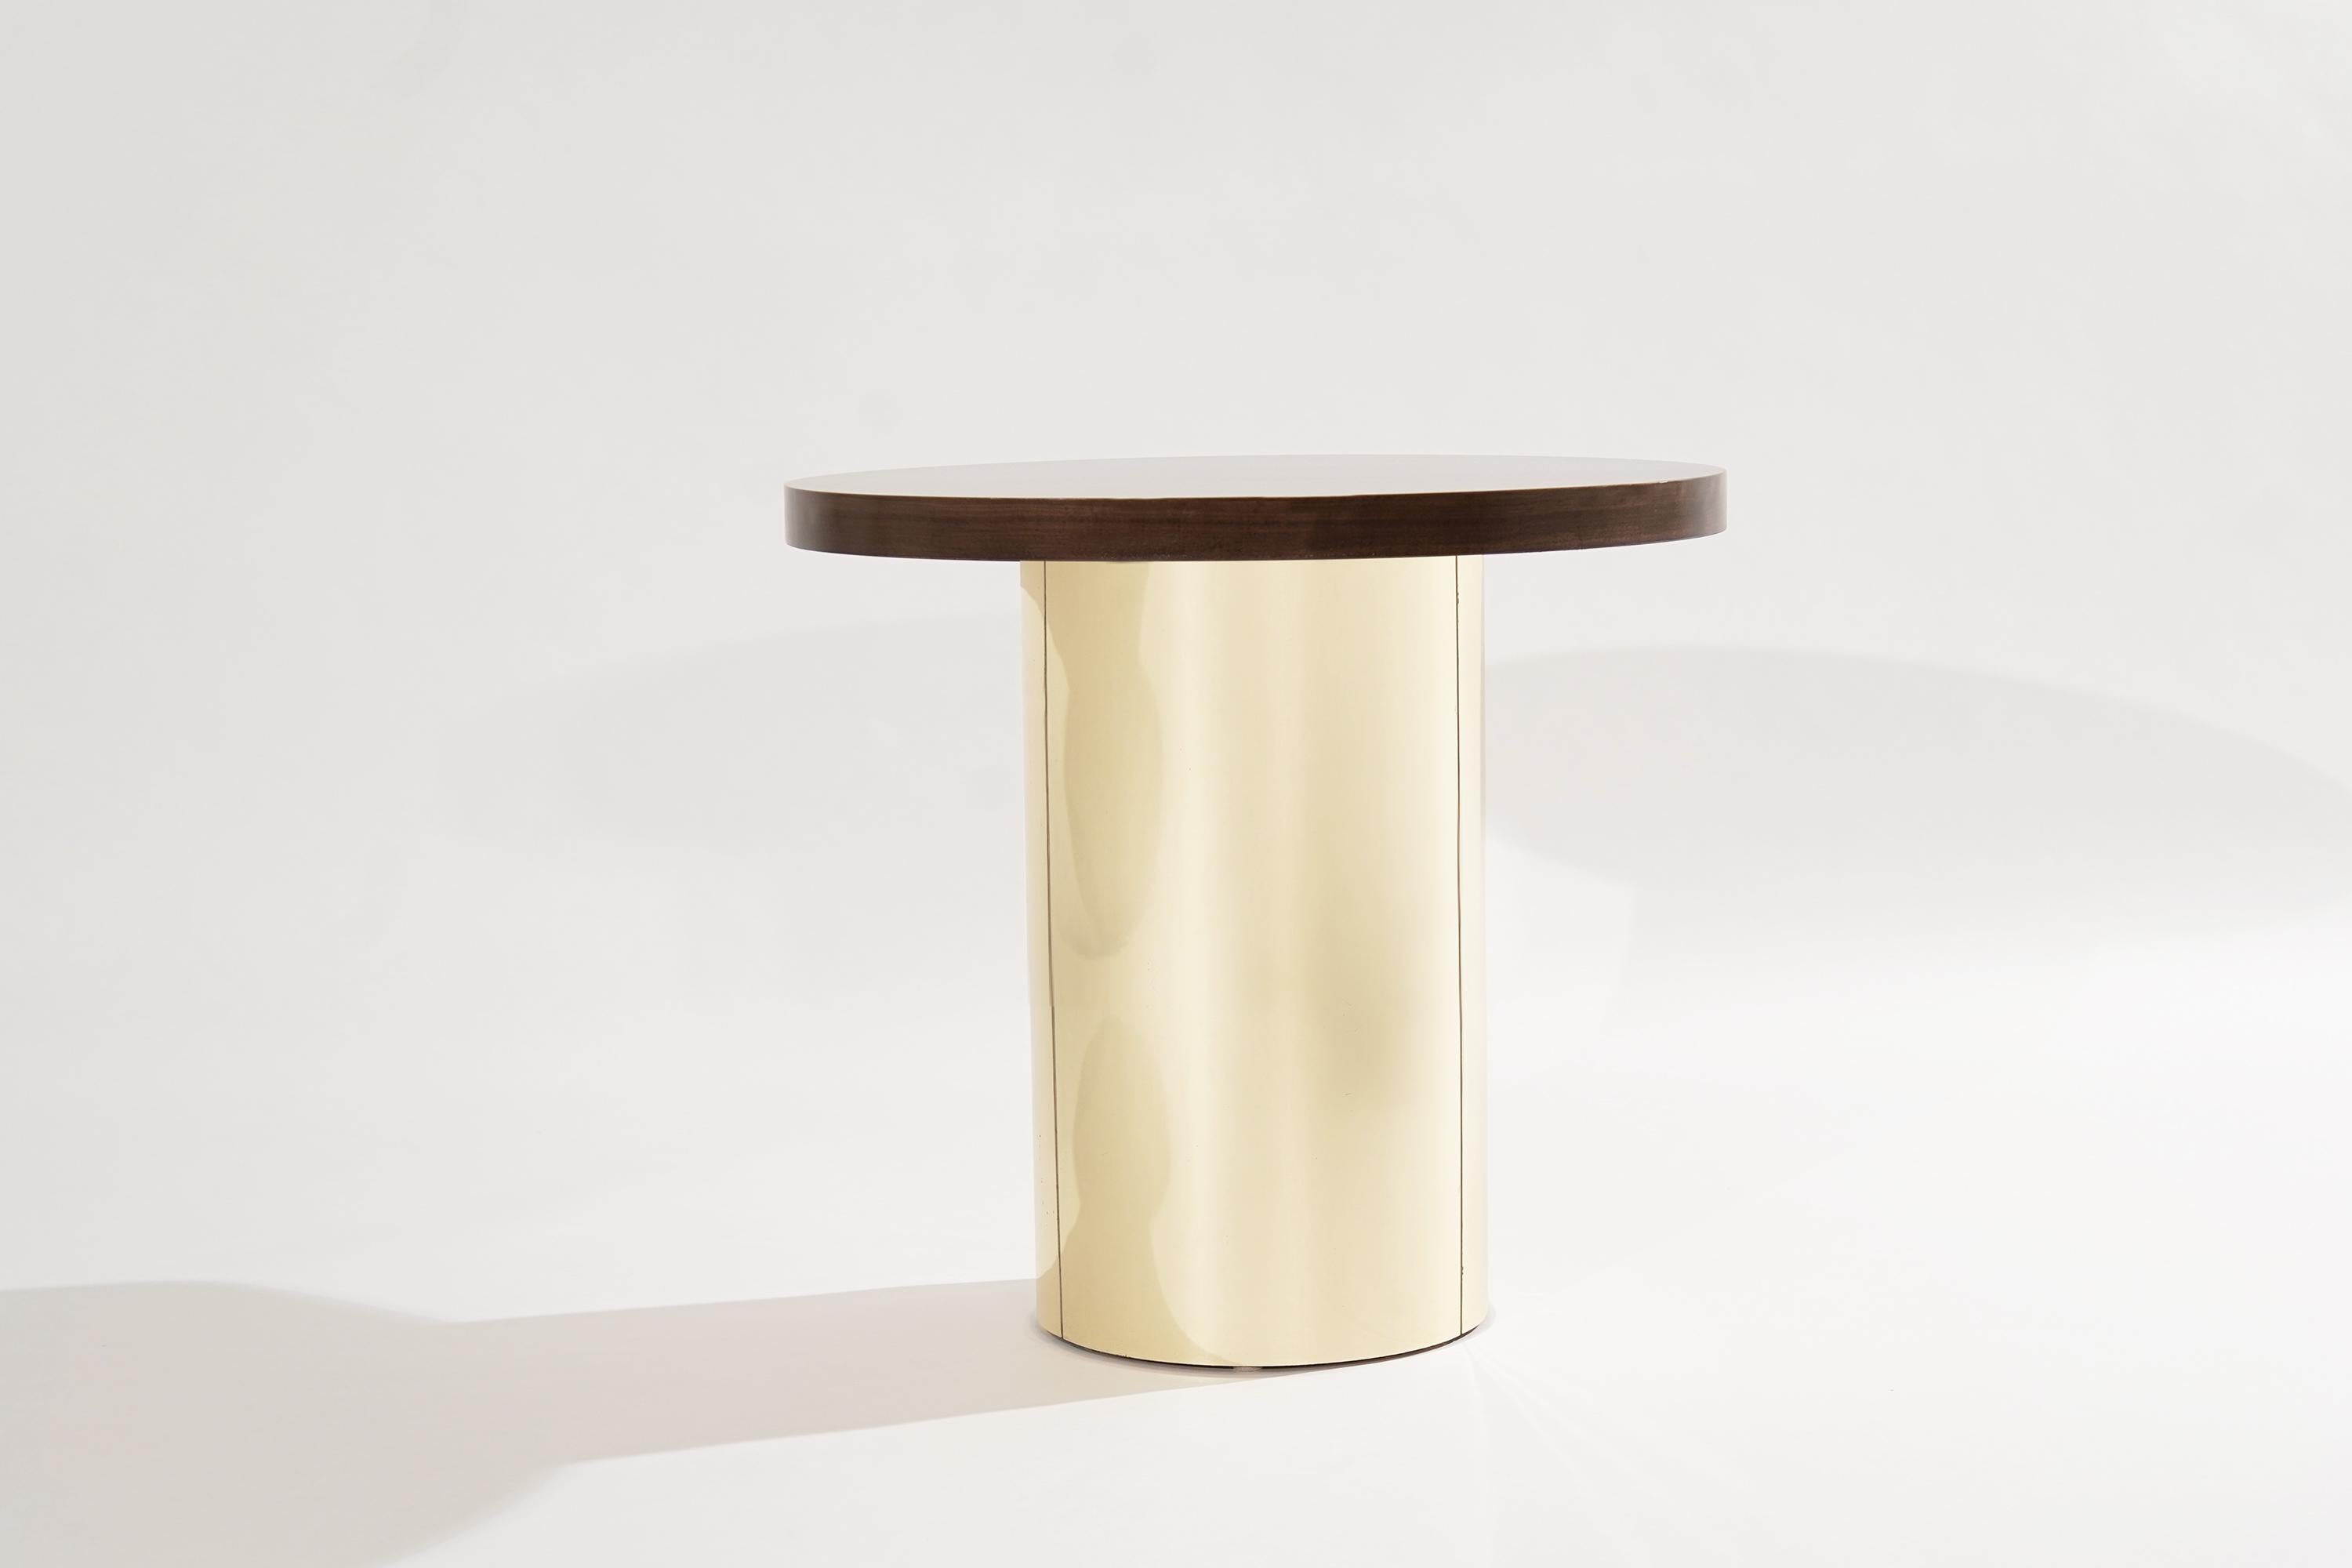 An occasional drinks table by Curtis Jere for Artisan House, circa 1950-1959. 
The brass pedestal base has been hand-polished, walnut top fully restored.

Other designers from this period include Herman Miller, Milo Baughman, Karl Springer,